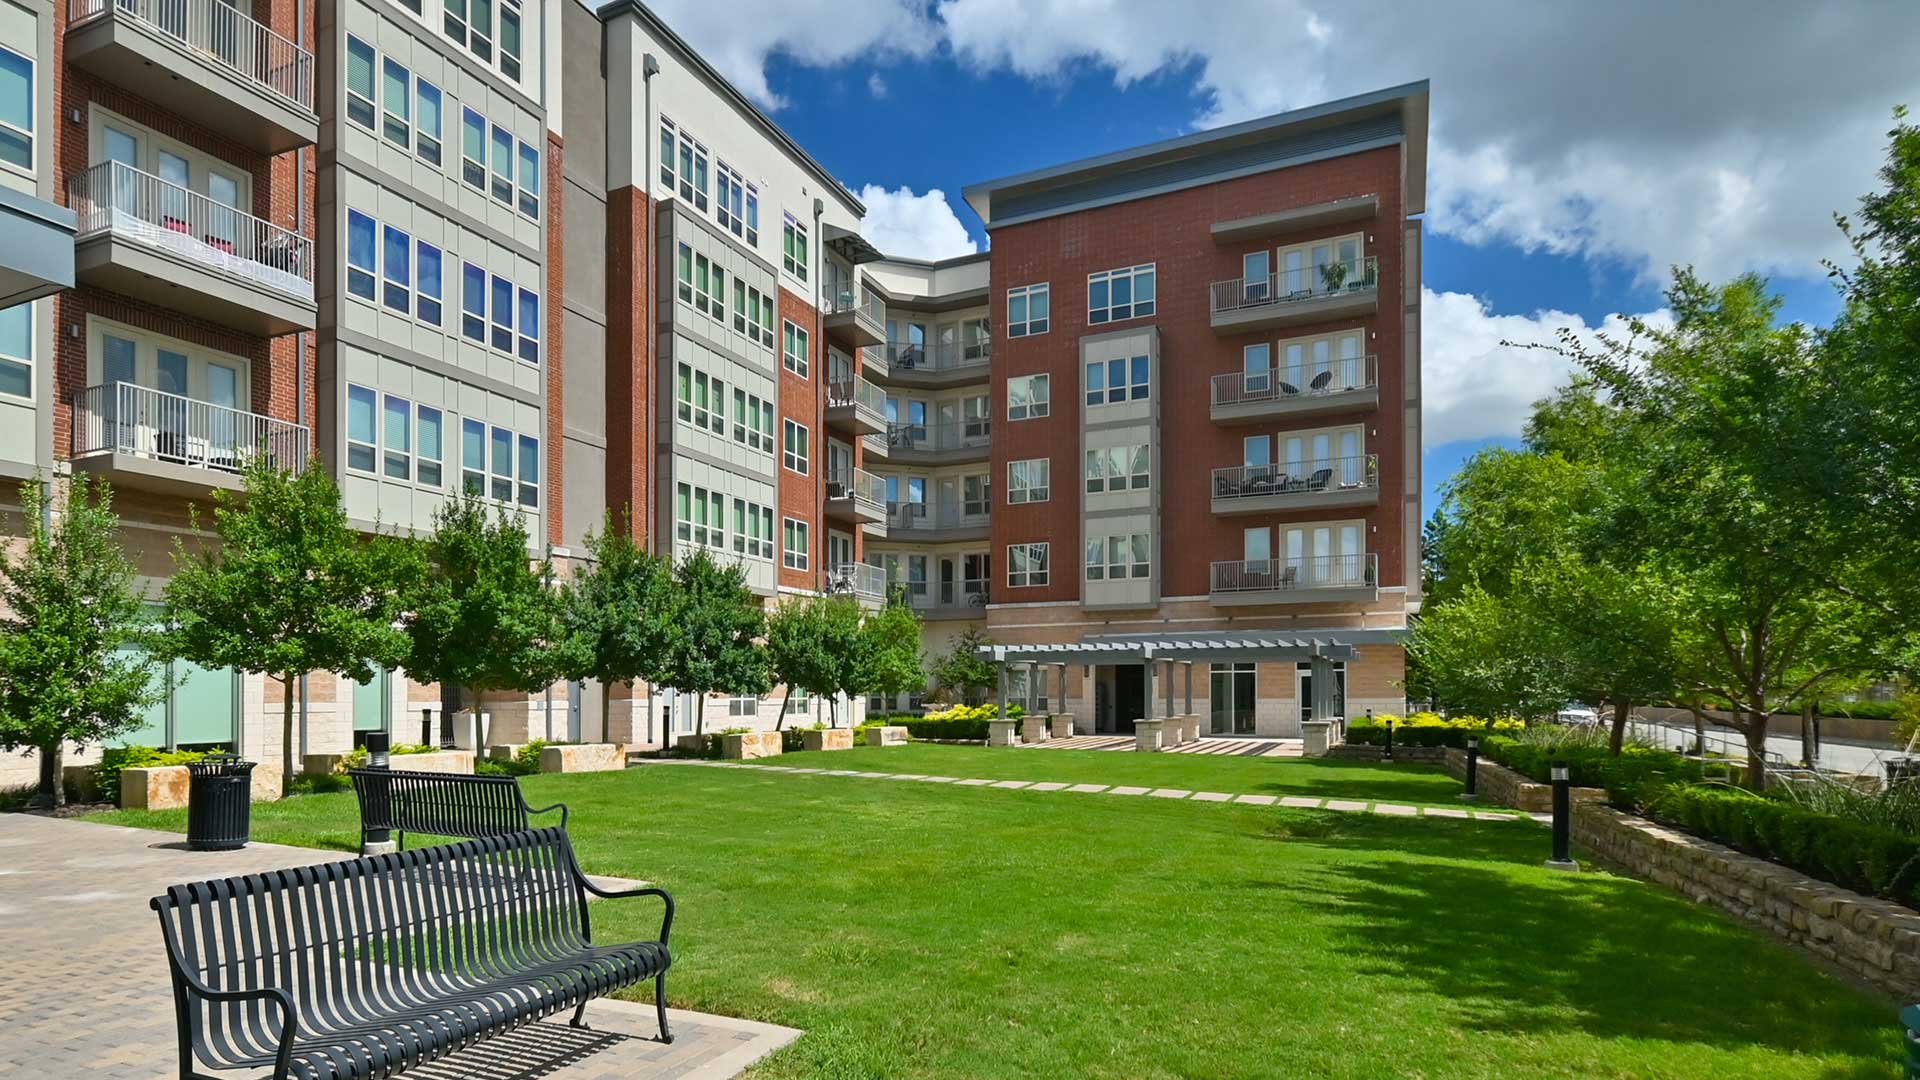 Looking across an open green space with the apartment building along the left and far side. A set of park benches on are to the left and trees line the right side.